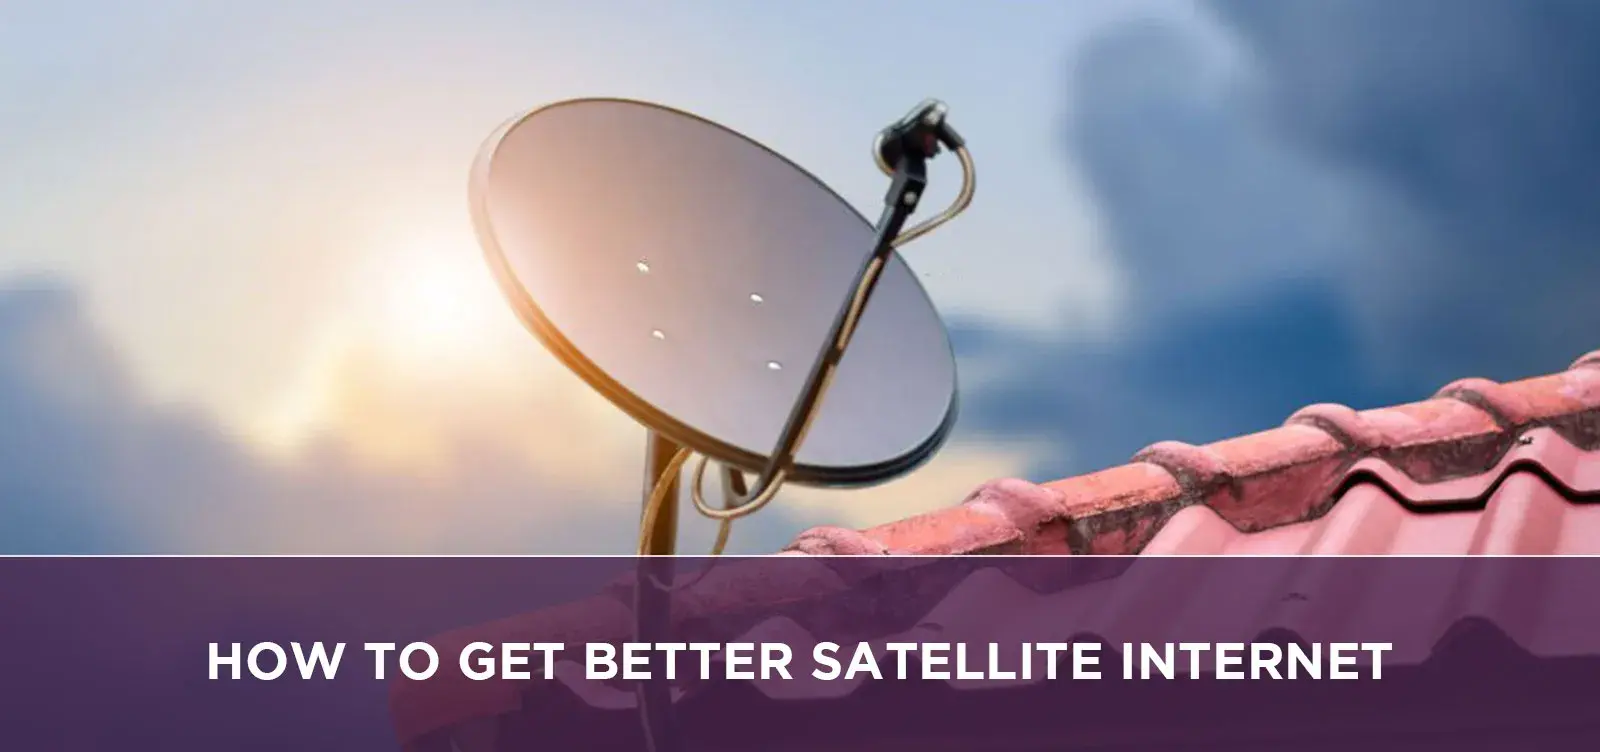 How To Get Better Satellite Internet?